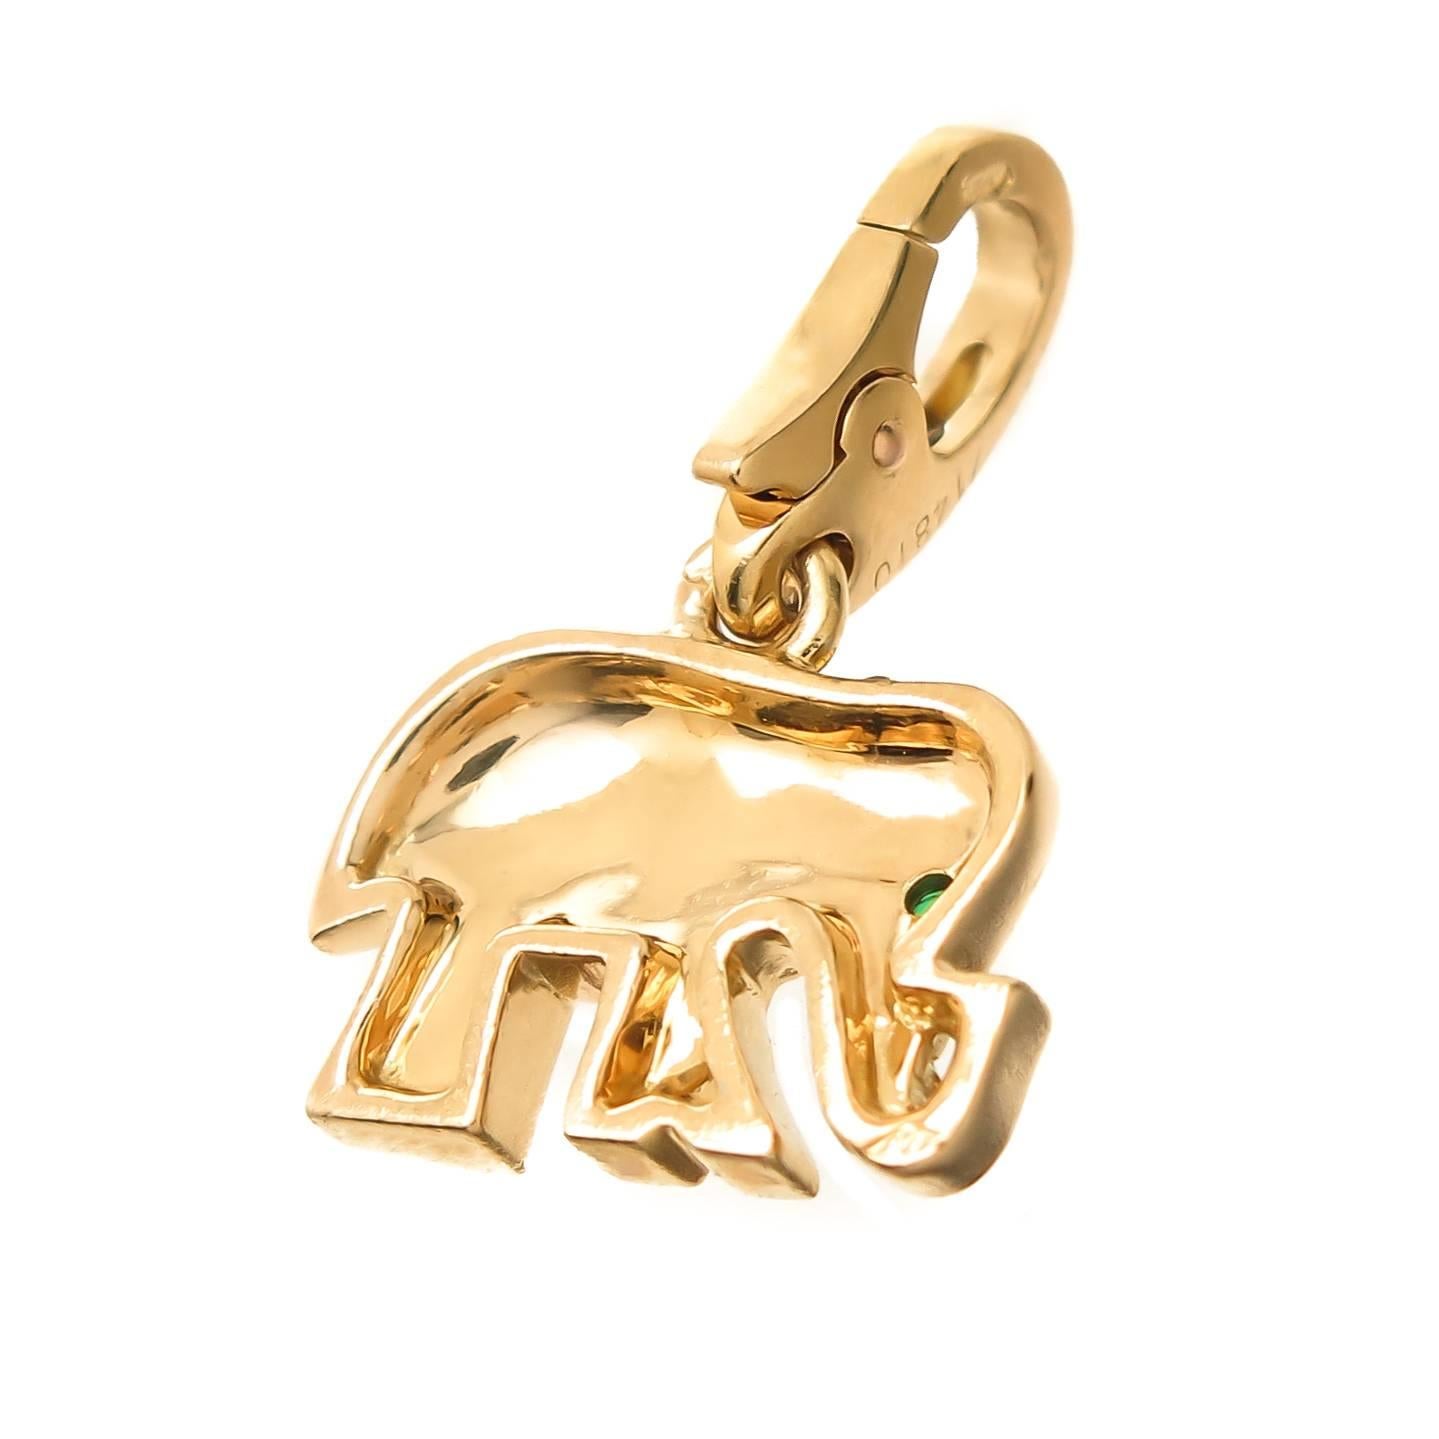 Circa 2000 Cartier 18K yellow Gold Elephant Charm,set with an Emerald Eye and Measuring 5/8 inch in length X 3/8 inch. Having a Lobster Claw lock so that the Charm can be easily taken on or off to be worn on a bracelet or a Necklace.